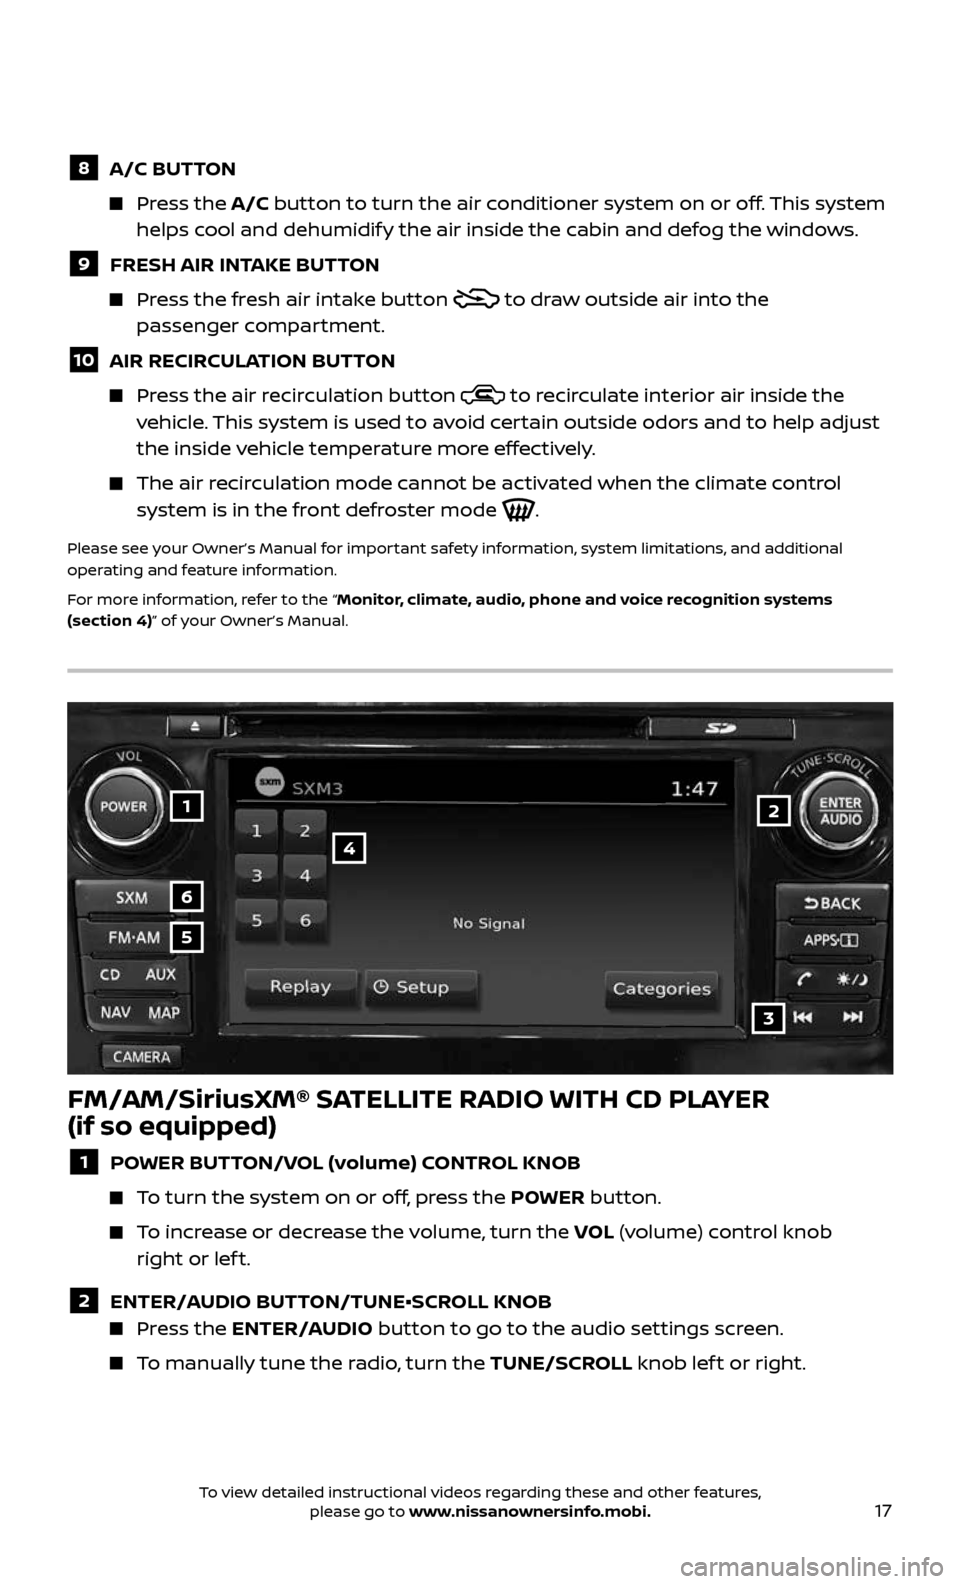 NISSAN ALTIMA 2017 L33 / 5.G Quick Reference Guide 17
1
6
4
5
3
2
FM/AM/SiriusXM® SATELLITE RADIO WITH CD PLAYER  
(if so equipped)
1 POWER BUTTON/VOL (volume) CONTROL KNOB
   To turn the system on or off, press the POWER button.
     To increase or 